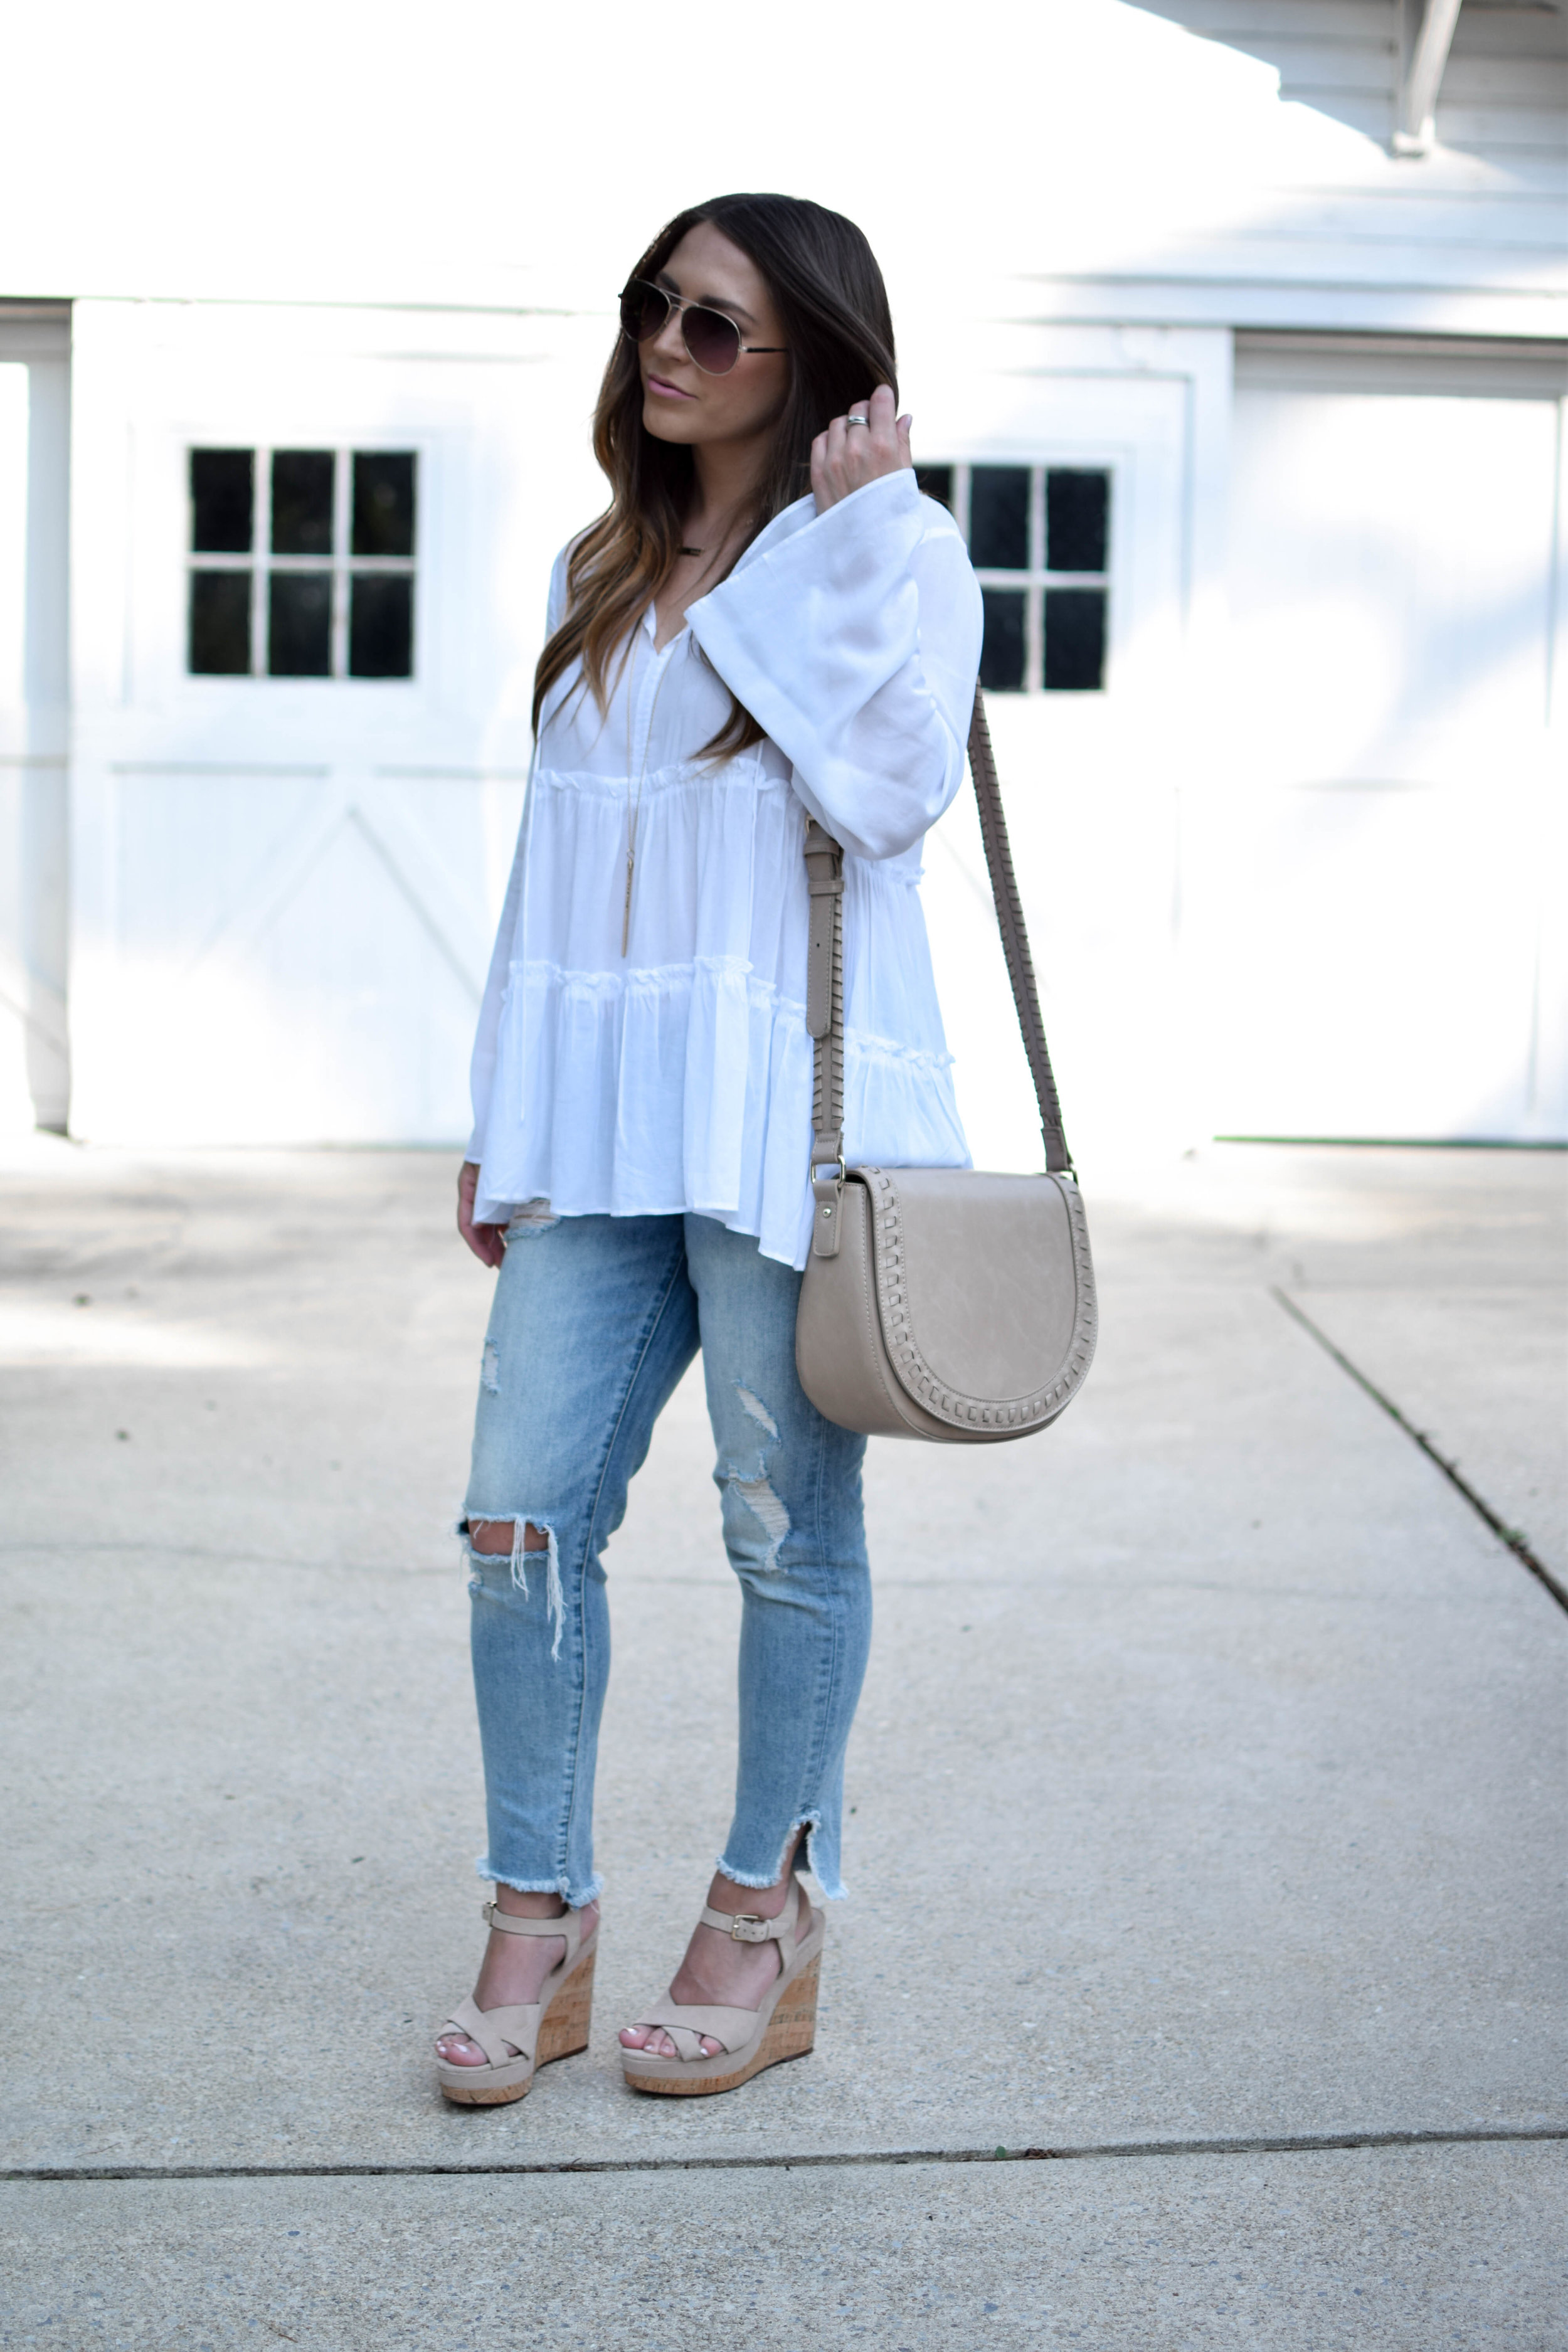 The Flowy White Top You Need in Your Closet ASAP | Pine Barren Beauty